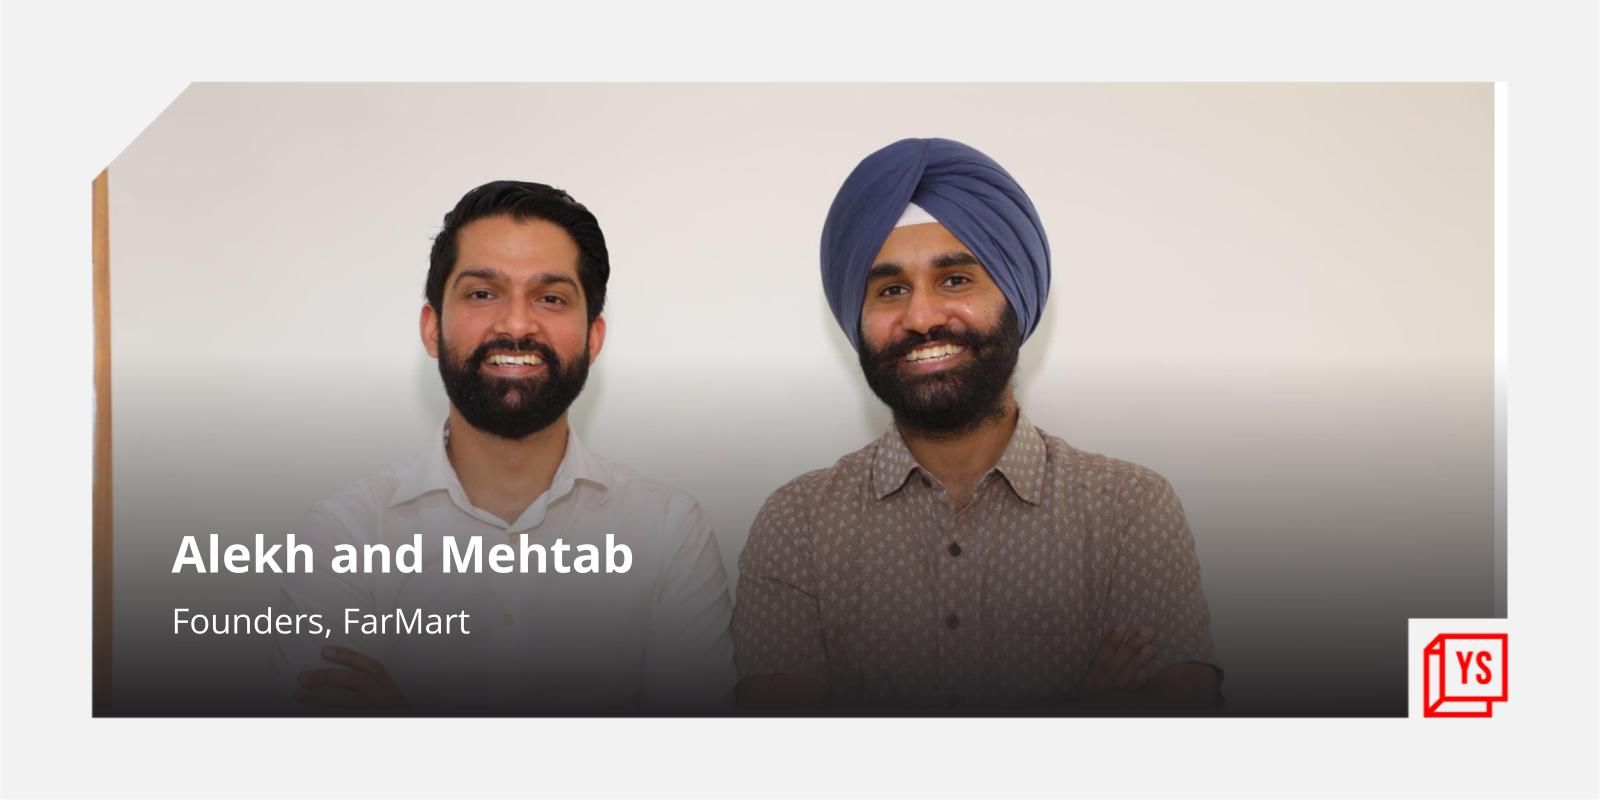 [Funding alert] Agritech startup FarMart raises $32M in Series B round led by General Catalyst